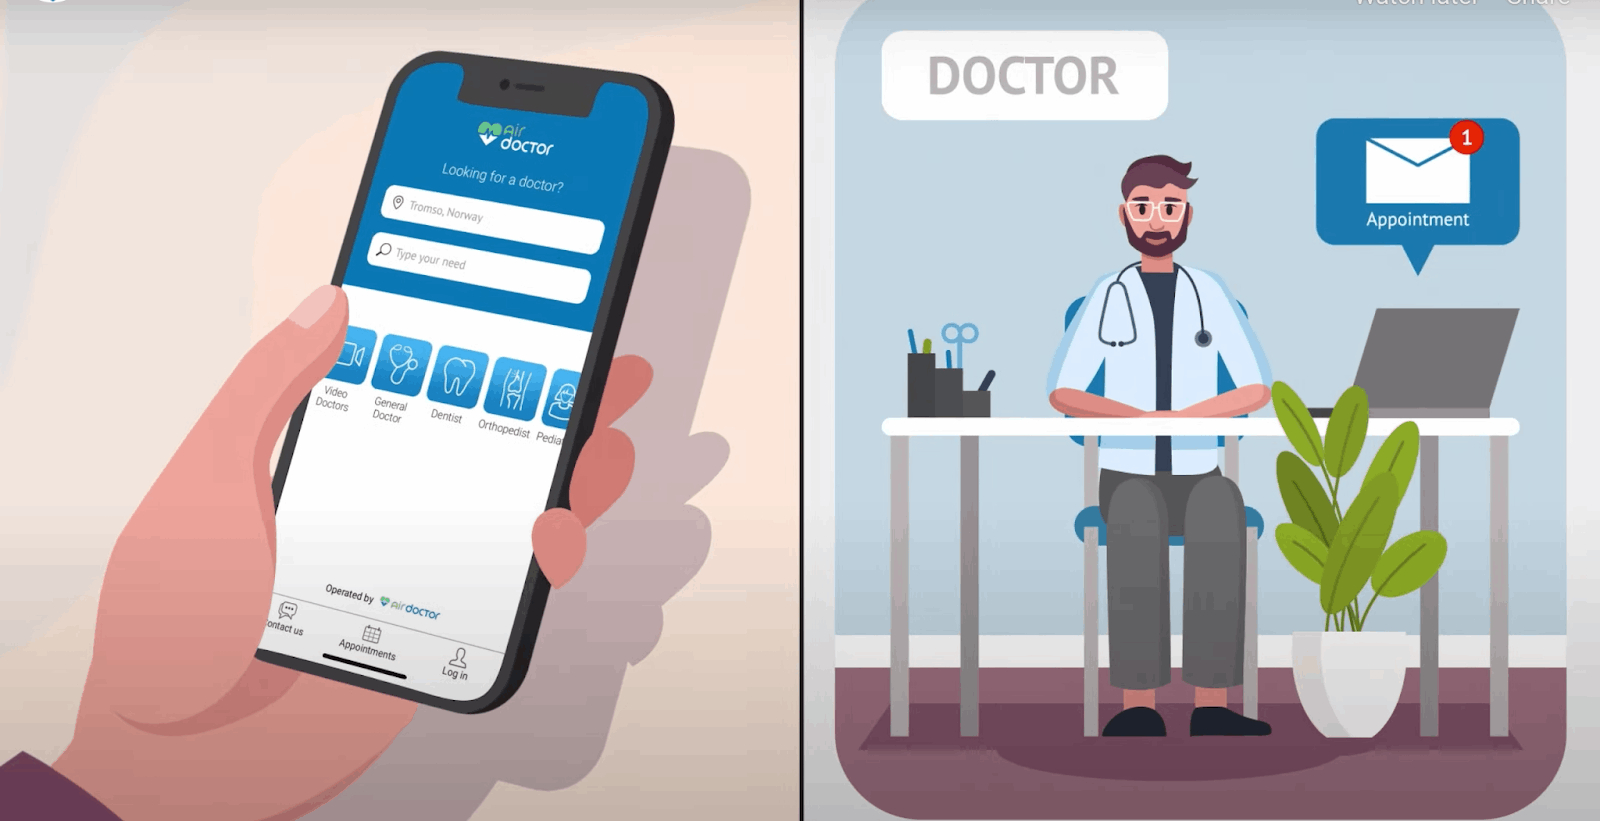 Air Doctor App - Browse Doctors While Traveling